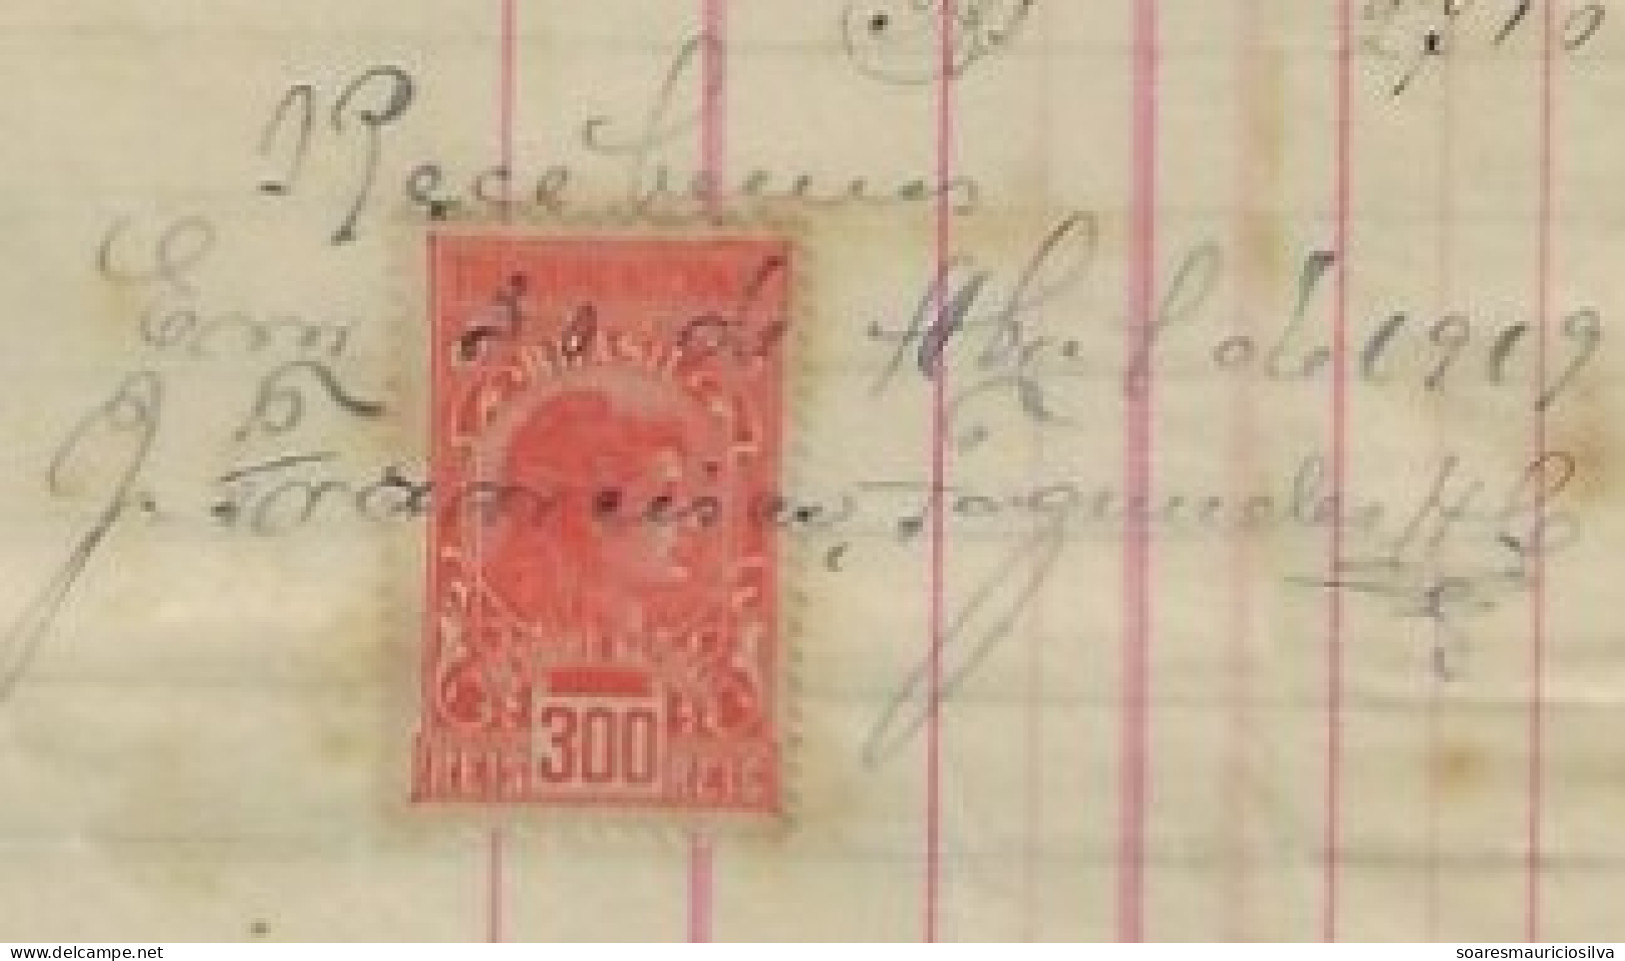 Brazil 1919 Cascatinha Warehouse By J. Francisco, Fagundes & Co Invoice Issued In Petrópolis National Tax Stamp 300 Réis - Covers & Documents